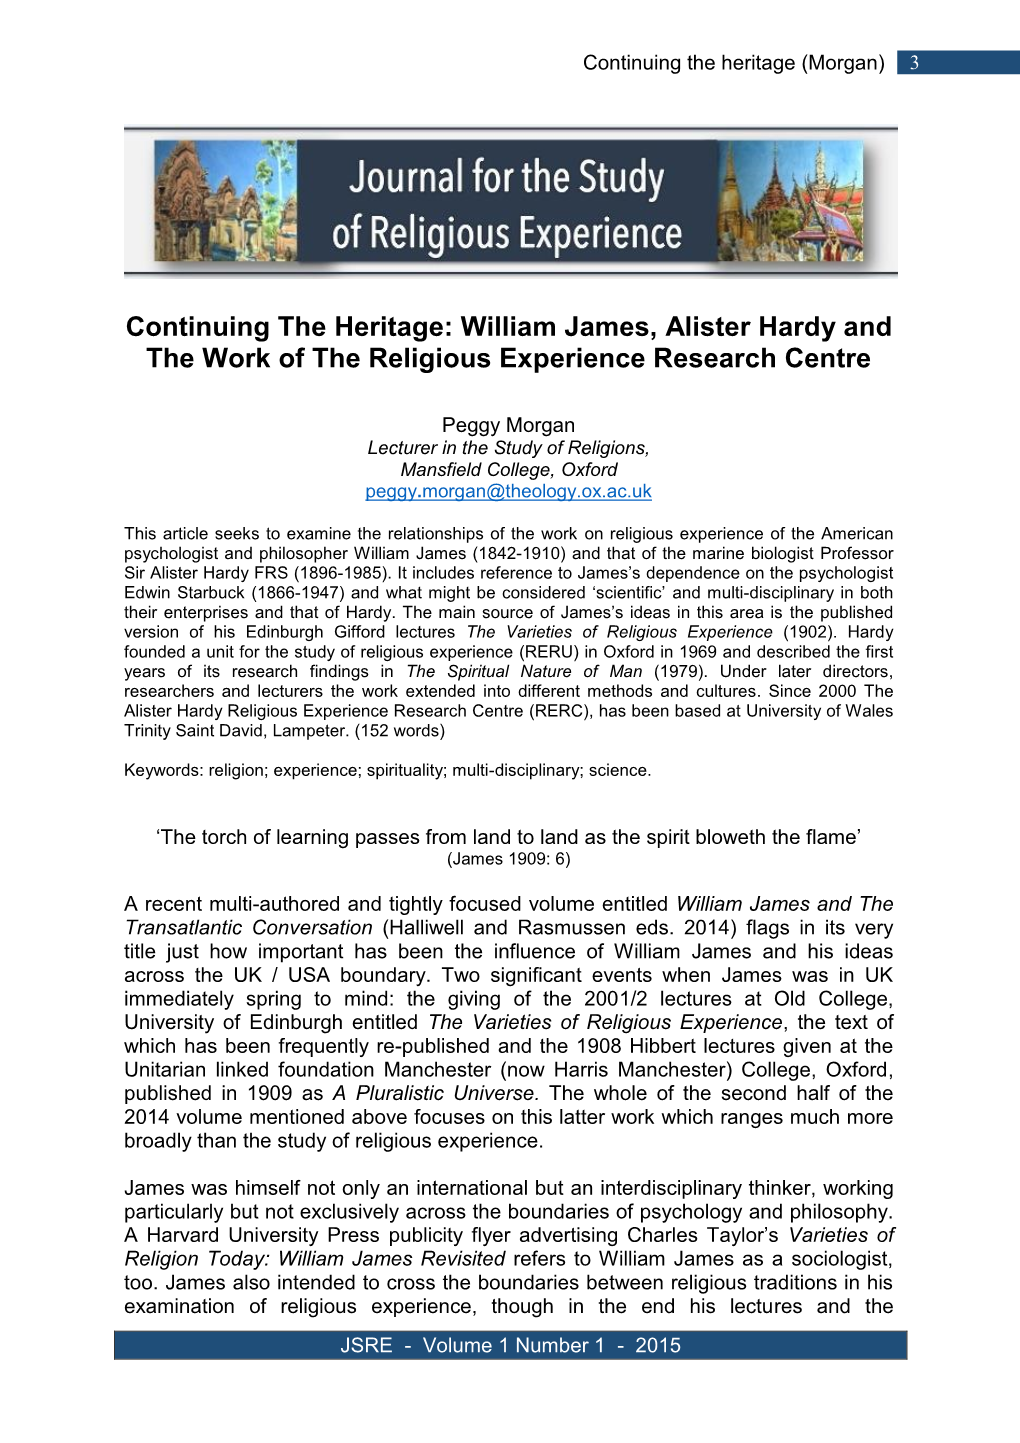 William James, Alister Hardy and the Work of the Religious Experience Research Centre